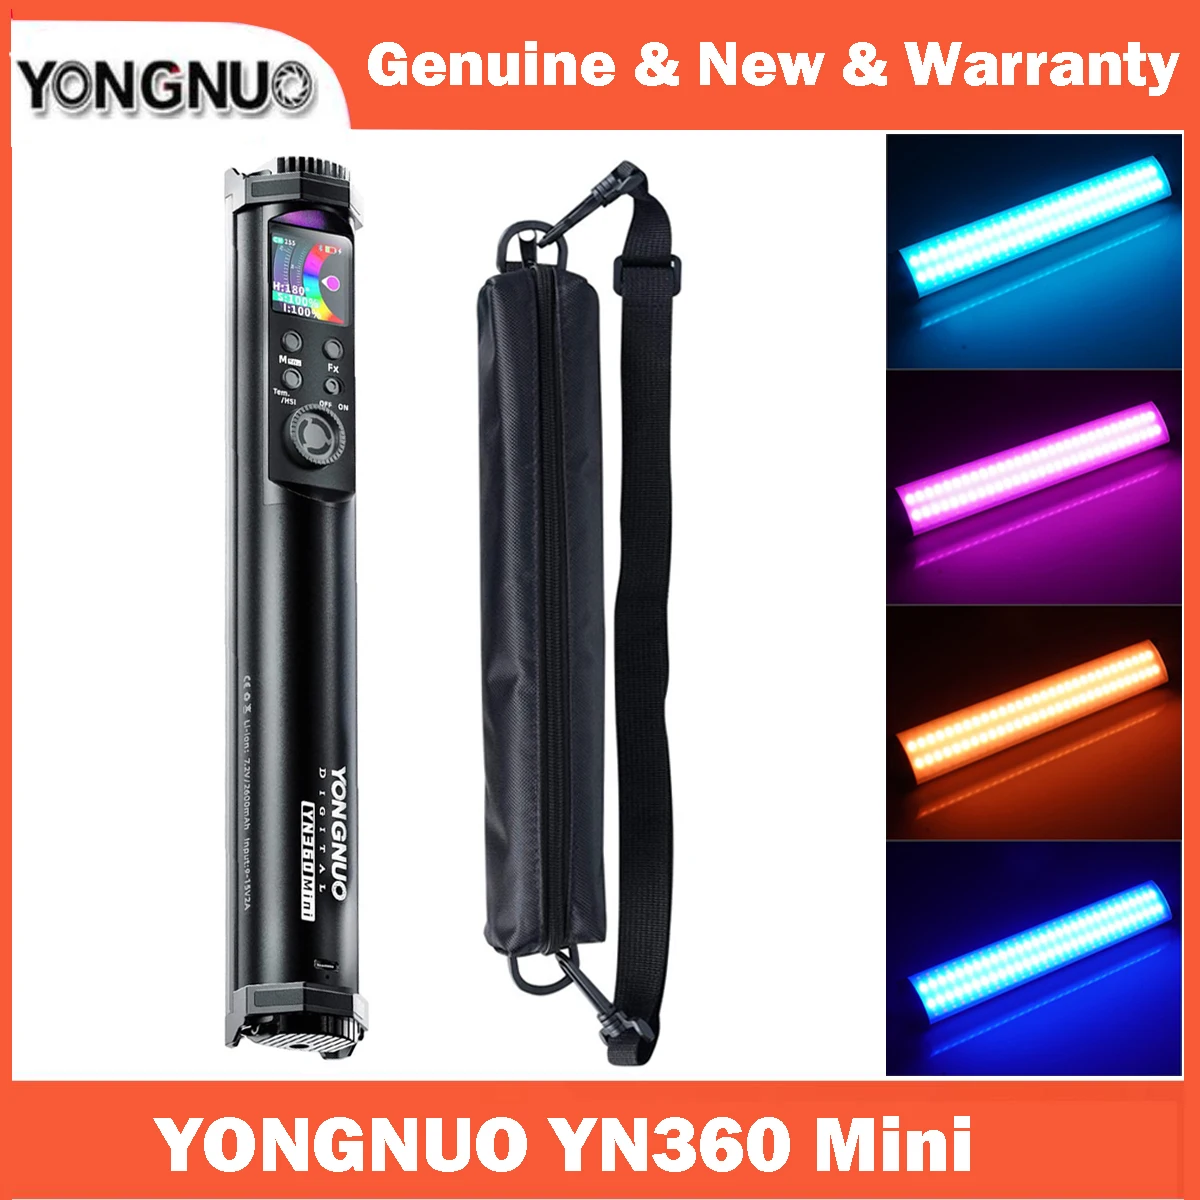 

Yongnuo YN360Mini RGB Full Color Photographic Ice Light LED Video Light 2700K-7500K Color Temperature 31 Special Scene Modes